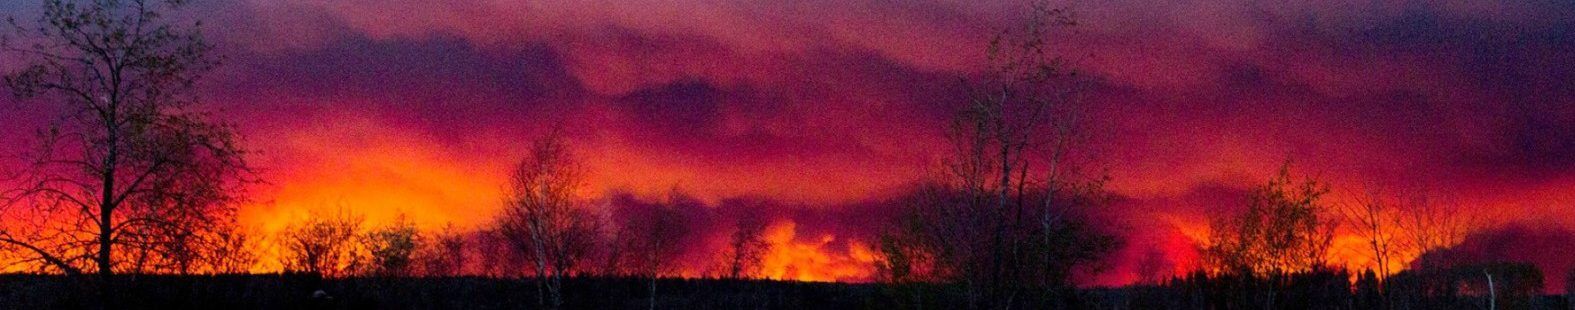 Photo showing Fort McMurray wildfire, filling the horizon with a giant plume of smoke overhead. Did anthropogenic climate change increase the chance of this extreme wildfire?